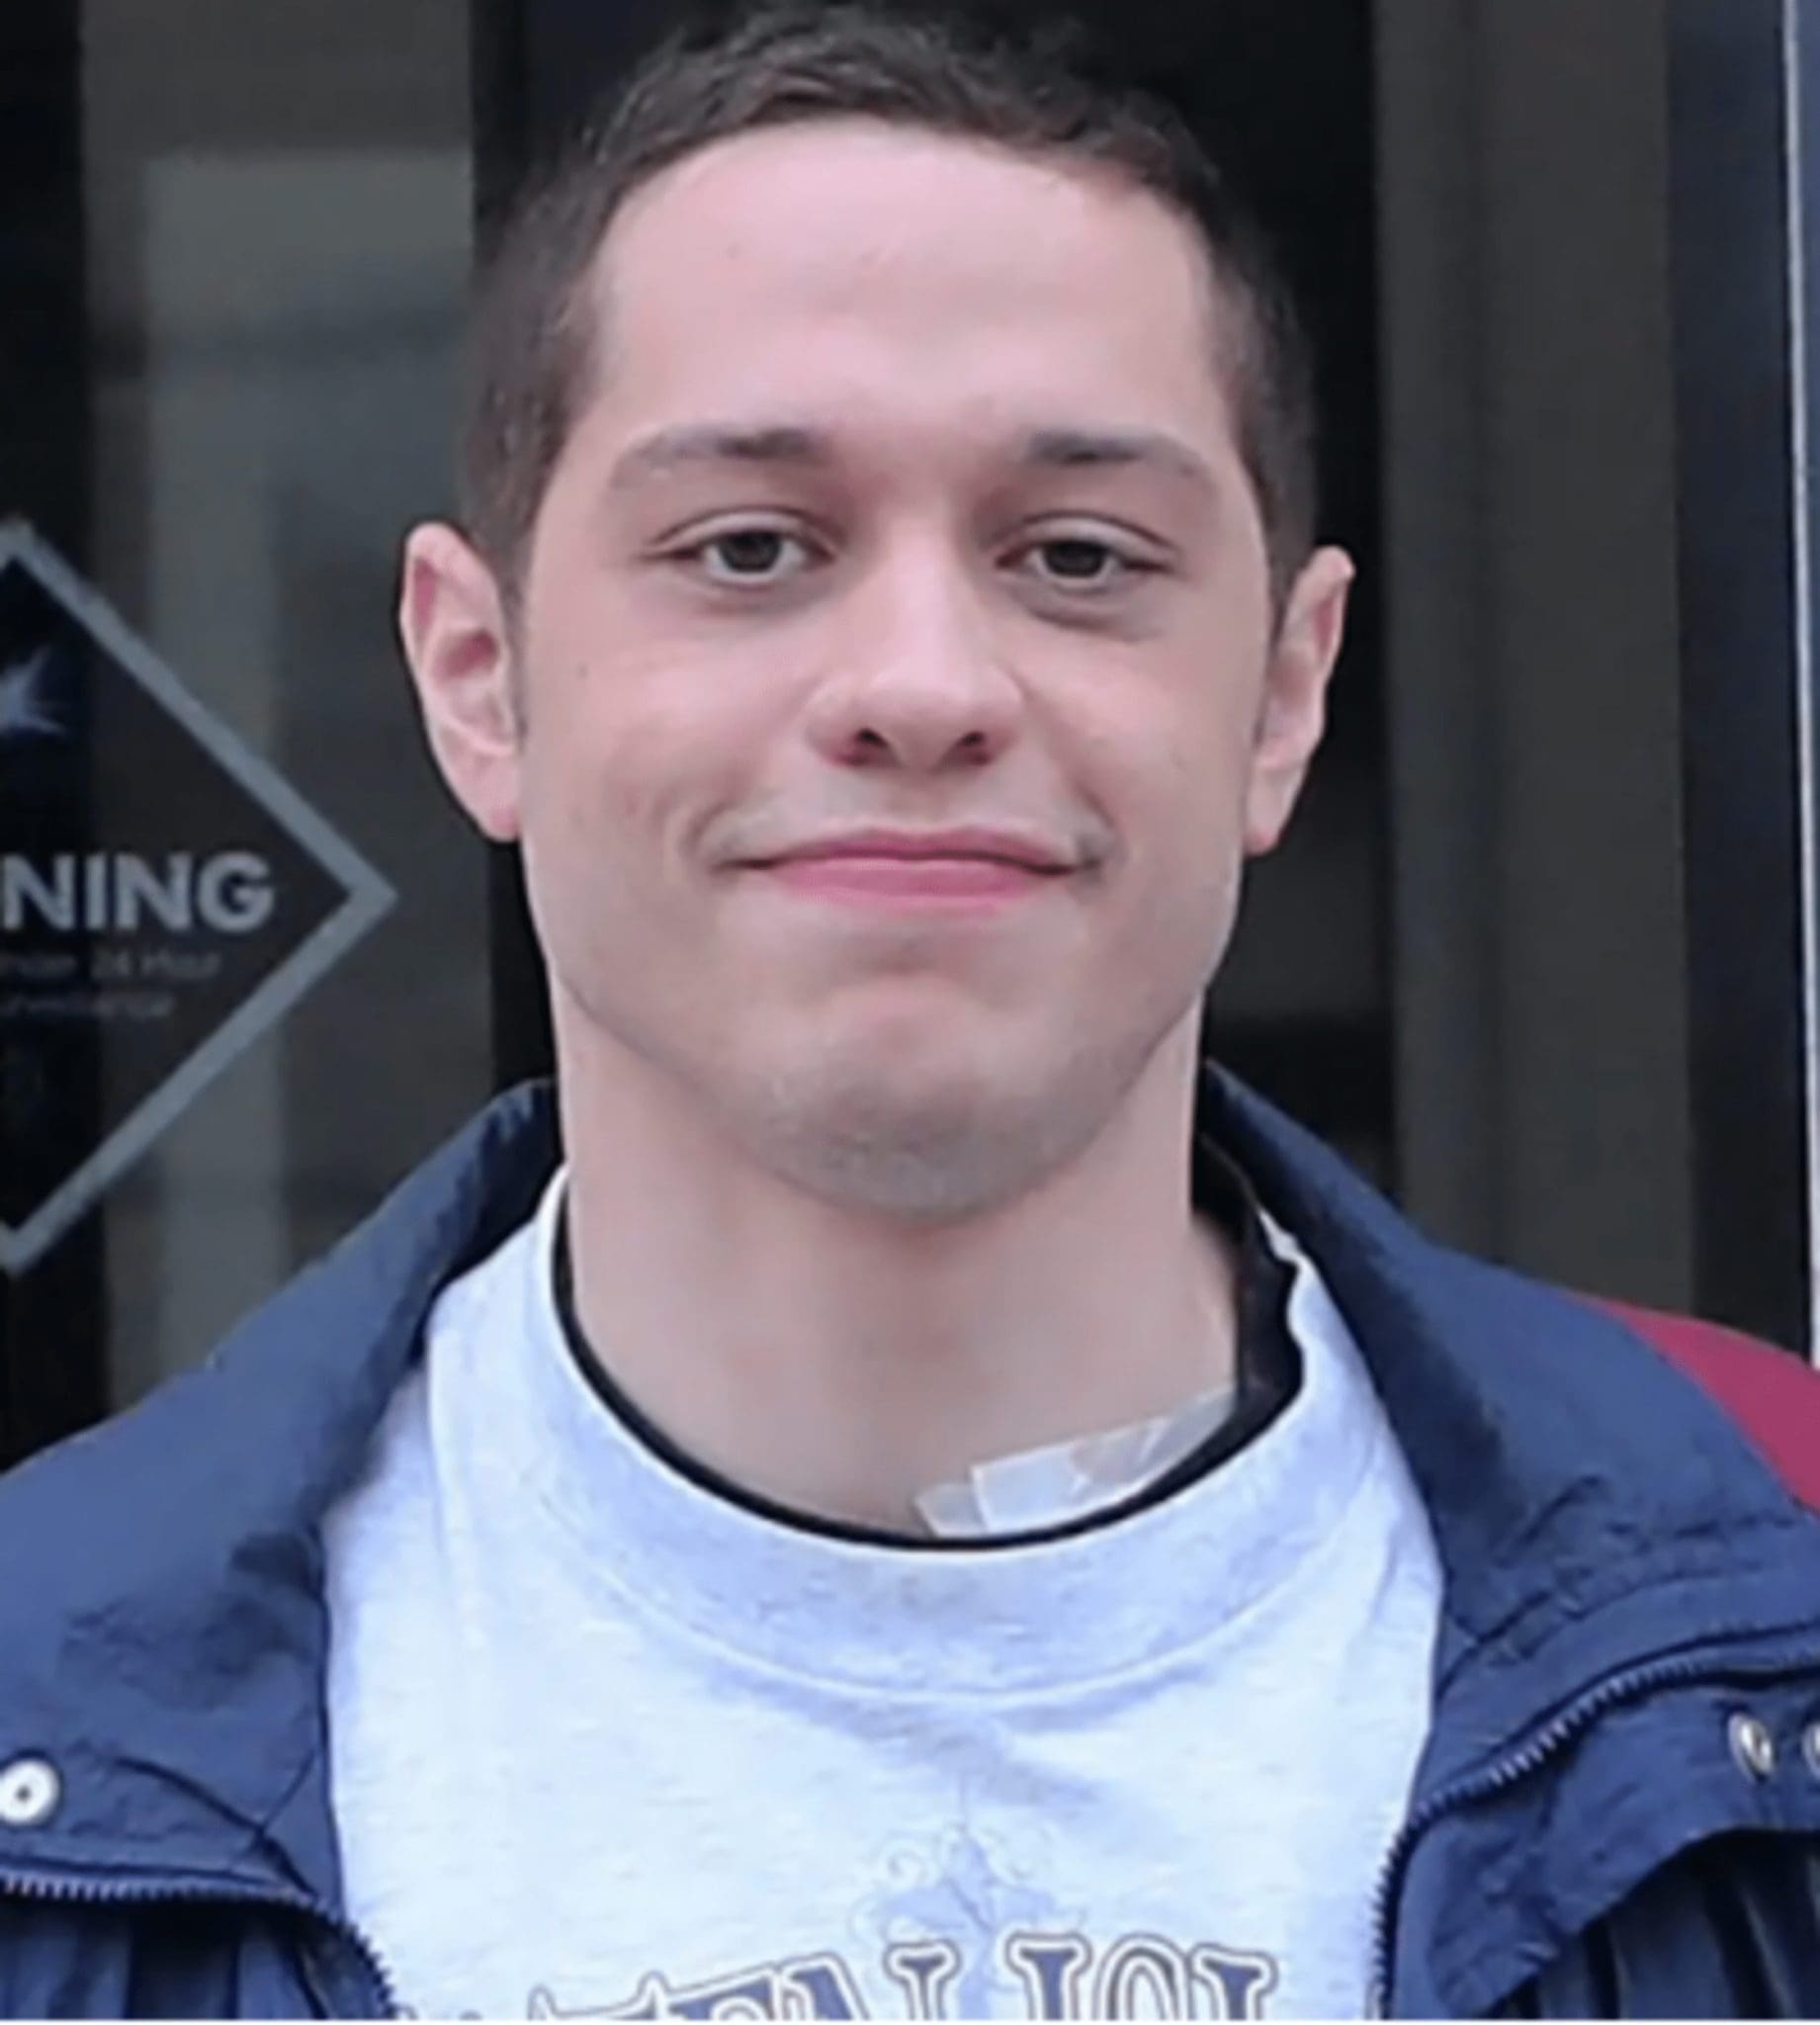 During filming, Pete Davidson was seen with a bandage covering one of his many Kim Kardashian tattoos.